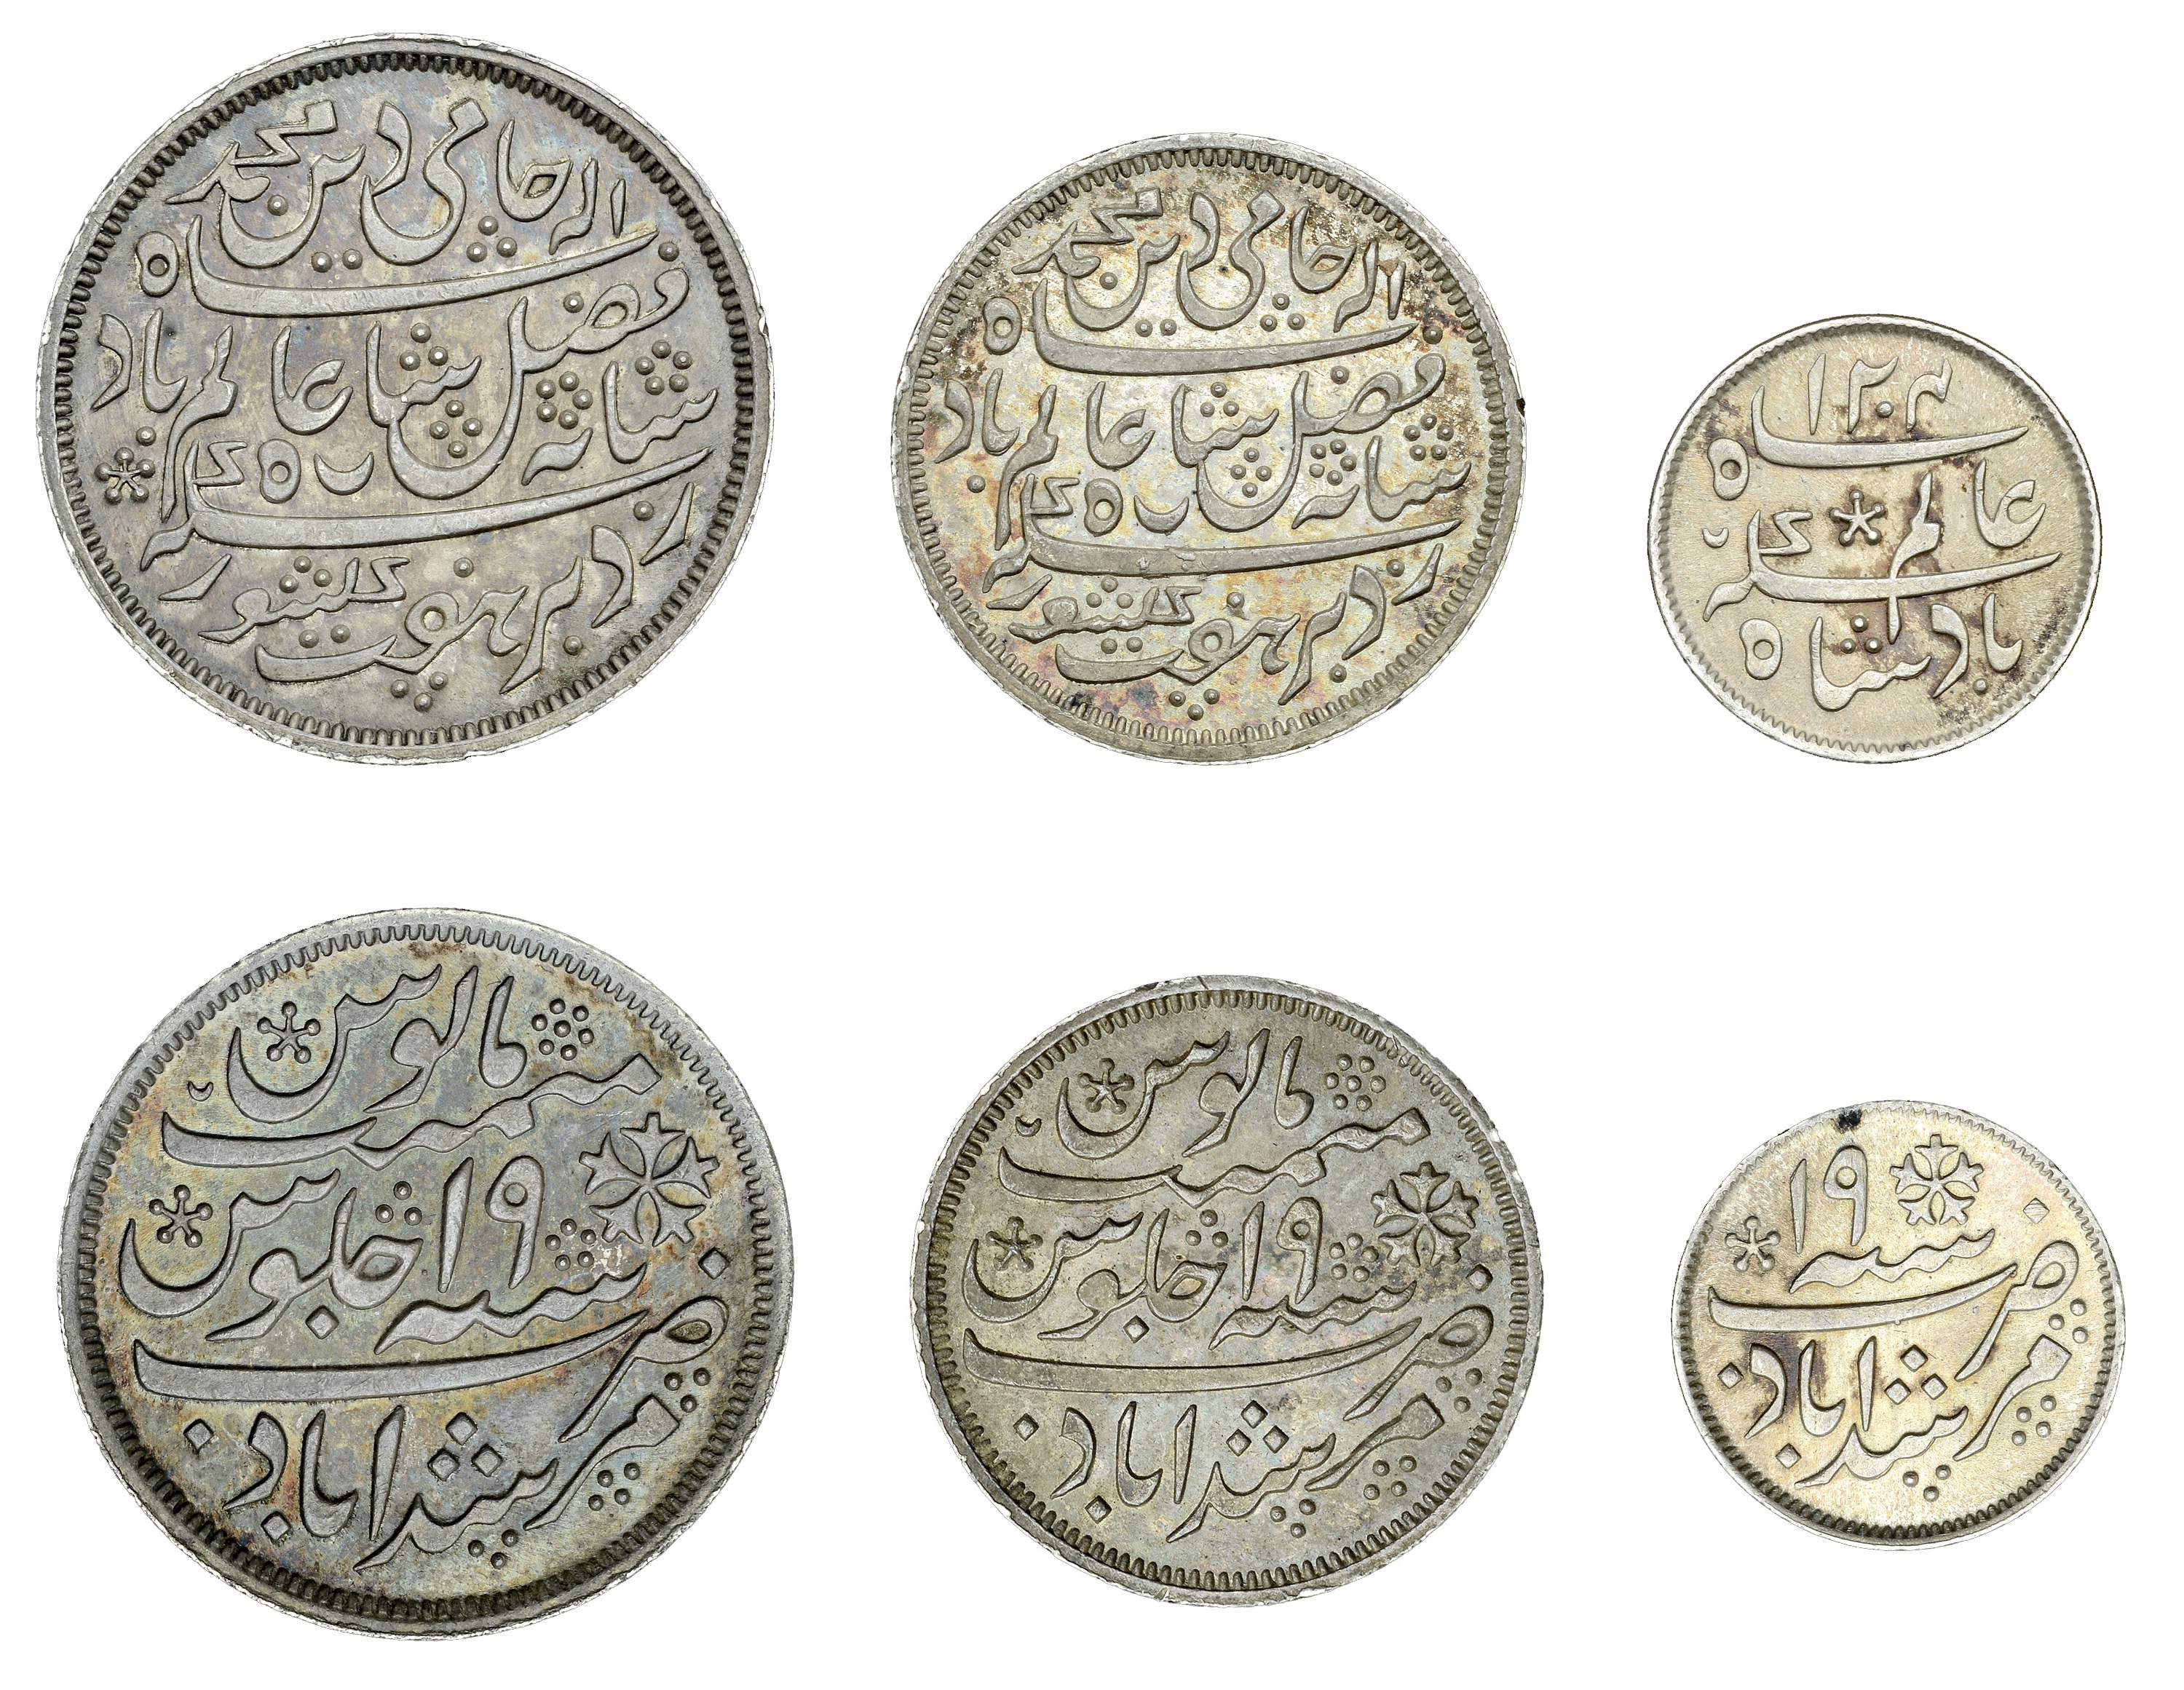 East India Company, Bengal Presidency, Calcutta Mint: Introduction of Steam, silver Rupee in...